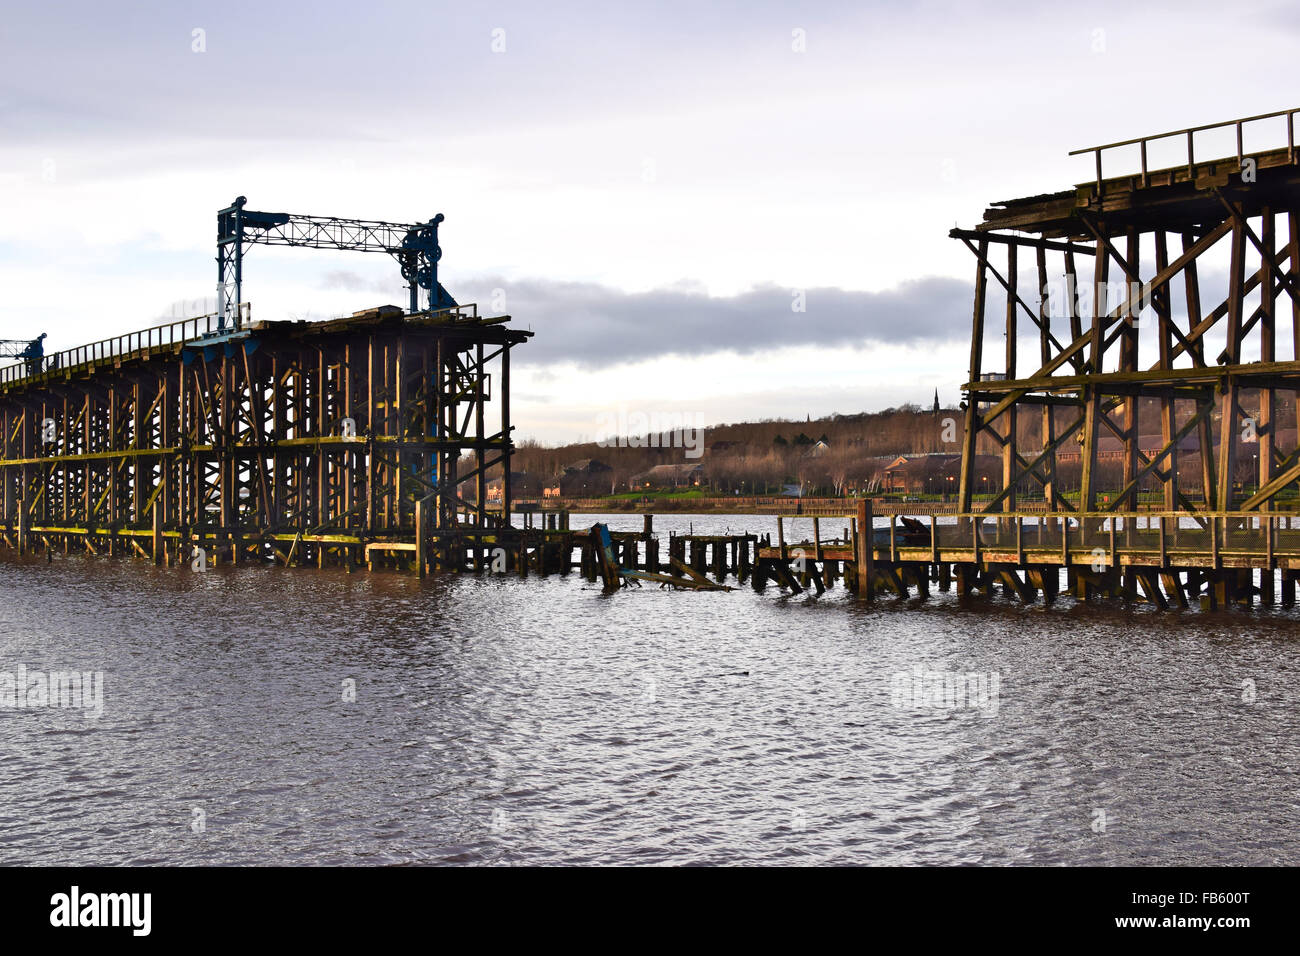 The Dunston Staiths on the river Tyne, Gateshead, North East England, showing section damaged by fire. Stock Photo